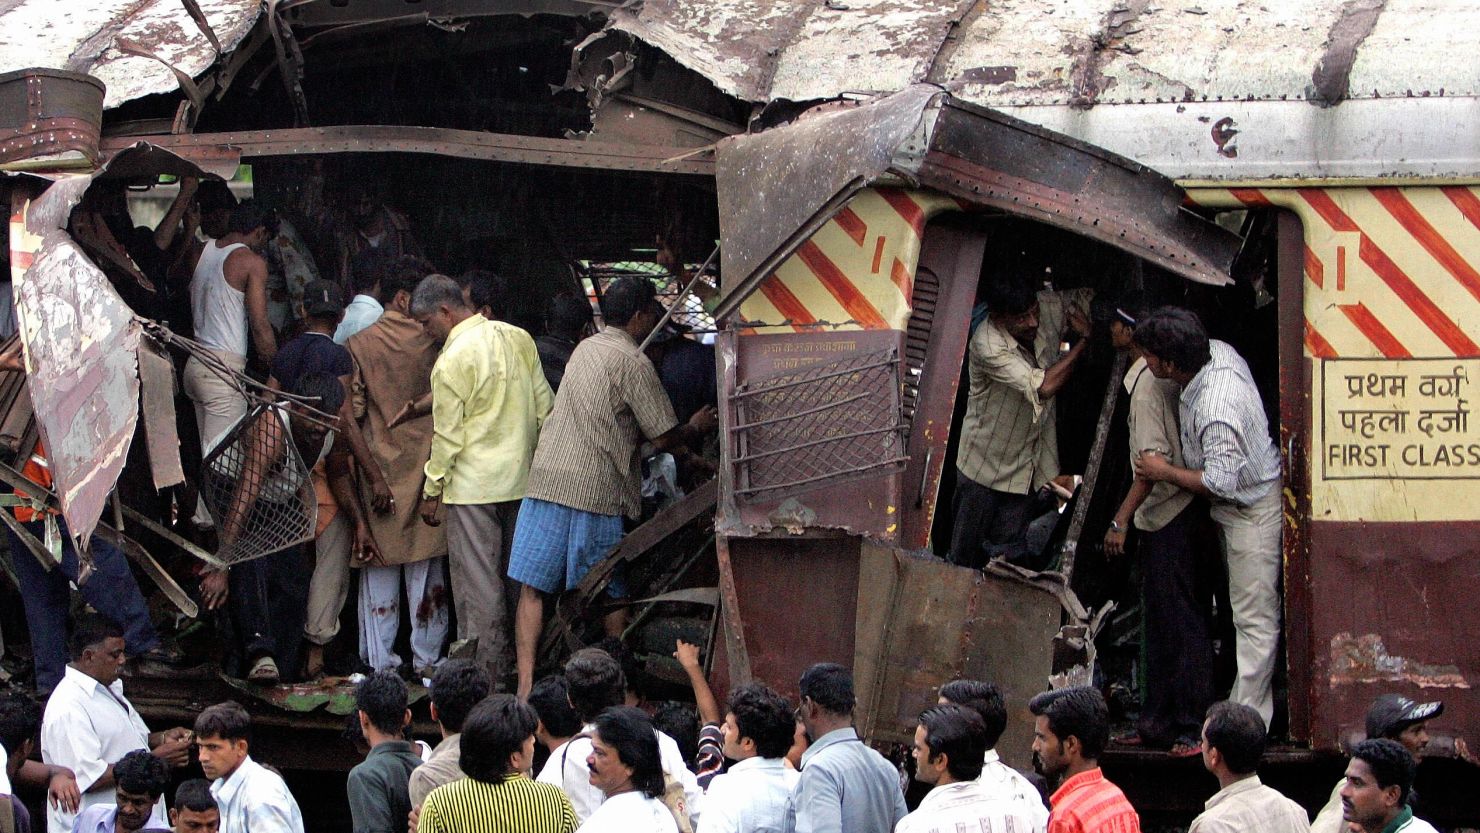 Rescue workers search for bodies inside the mangled compartment of a train after the 2006 bombing.